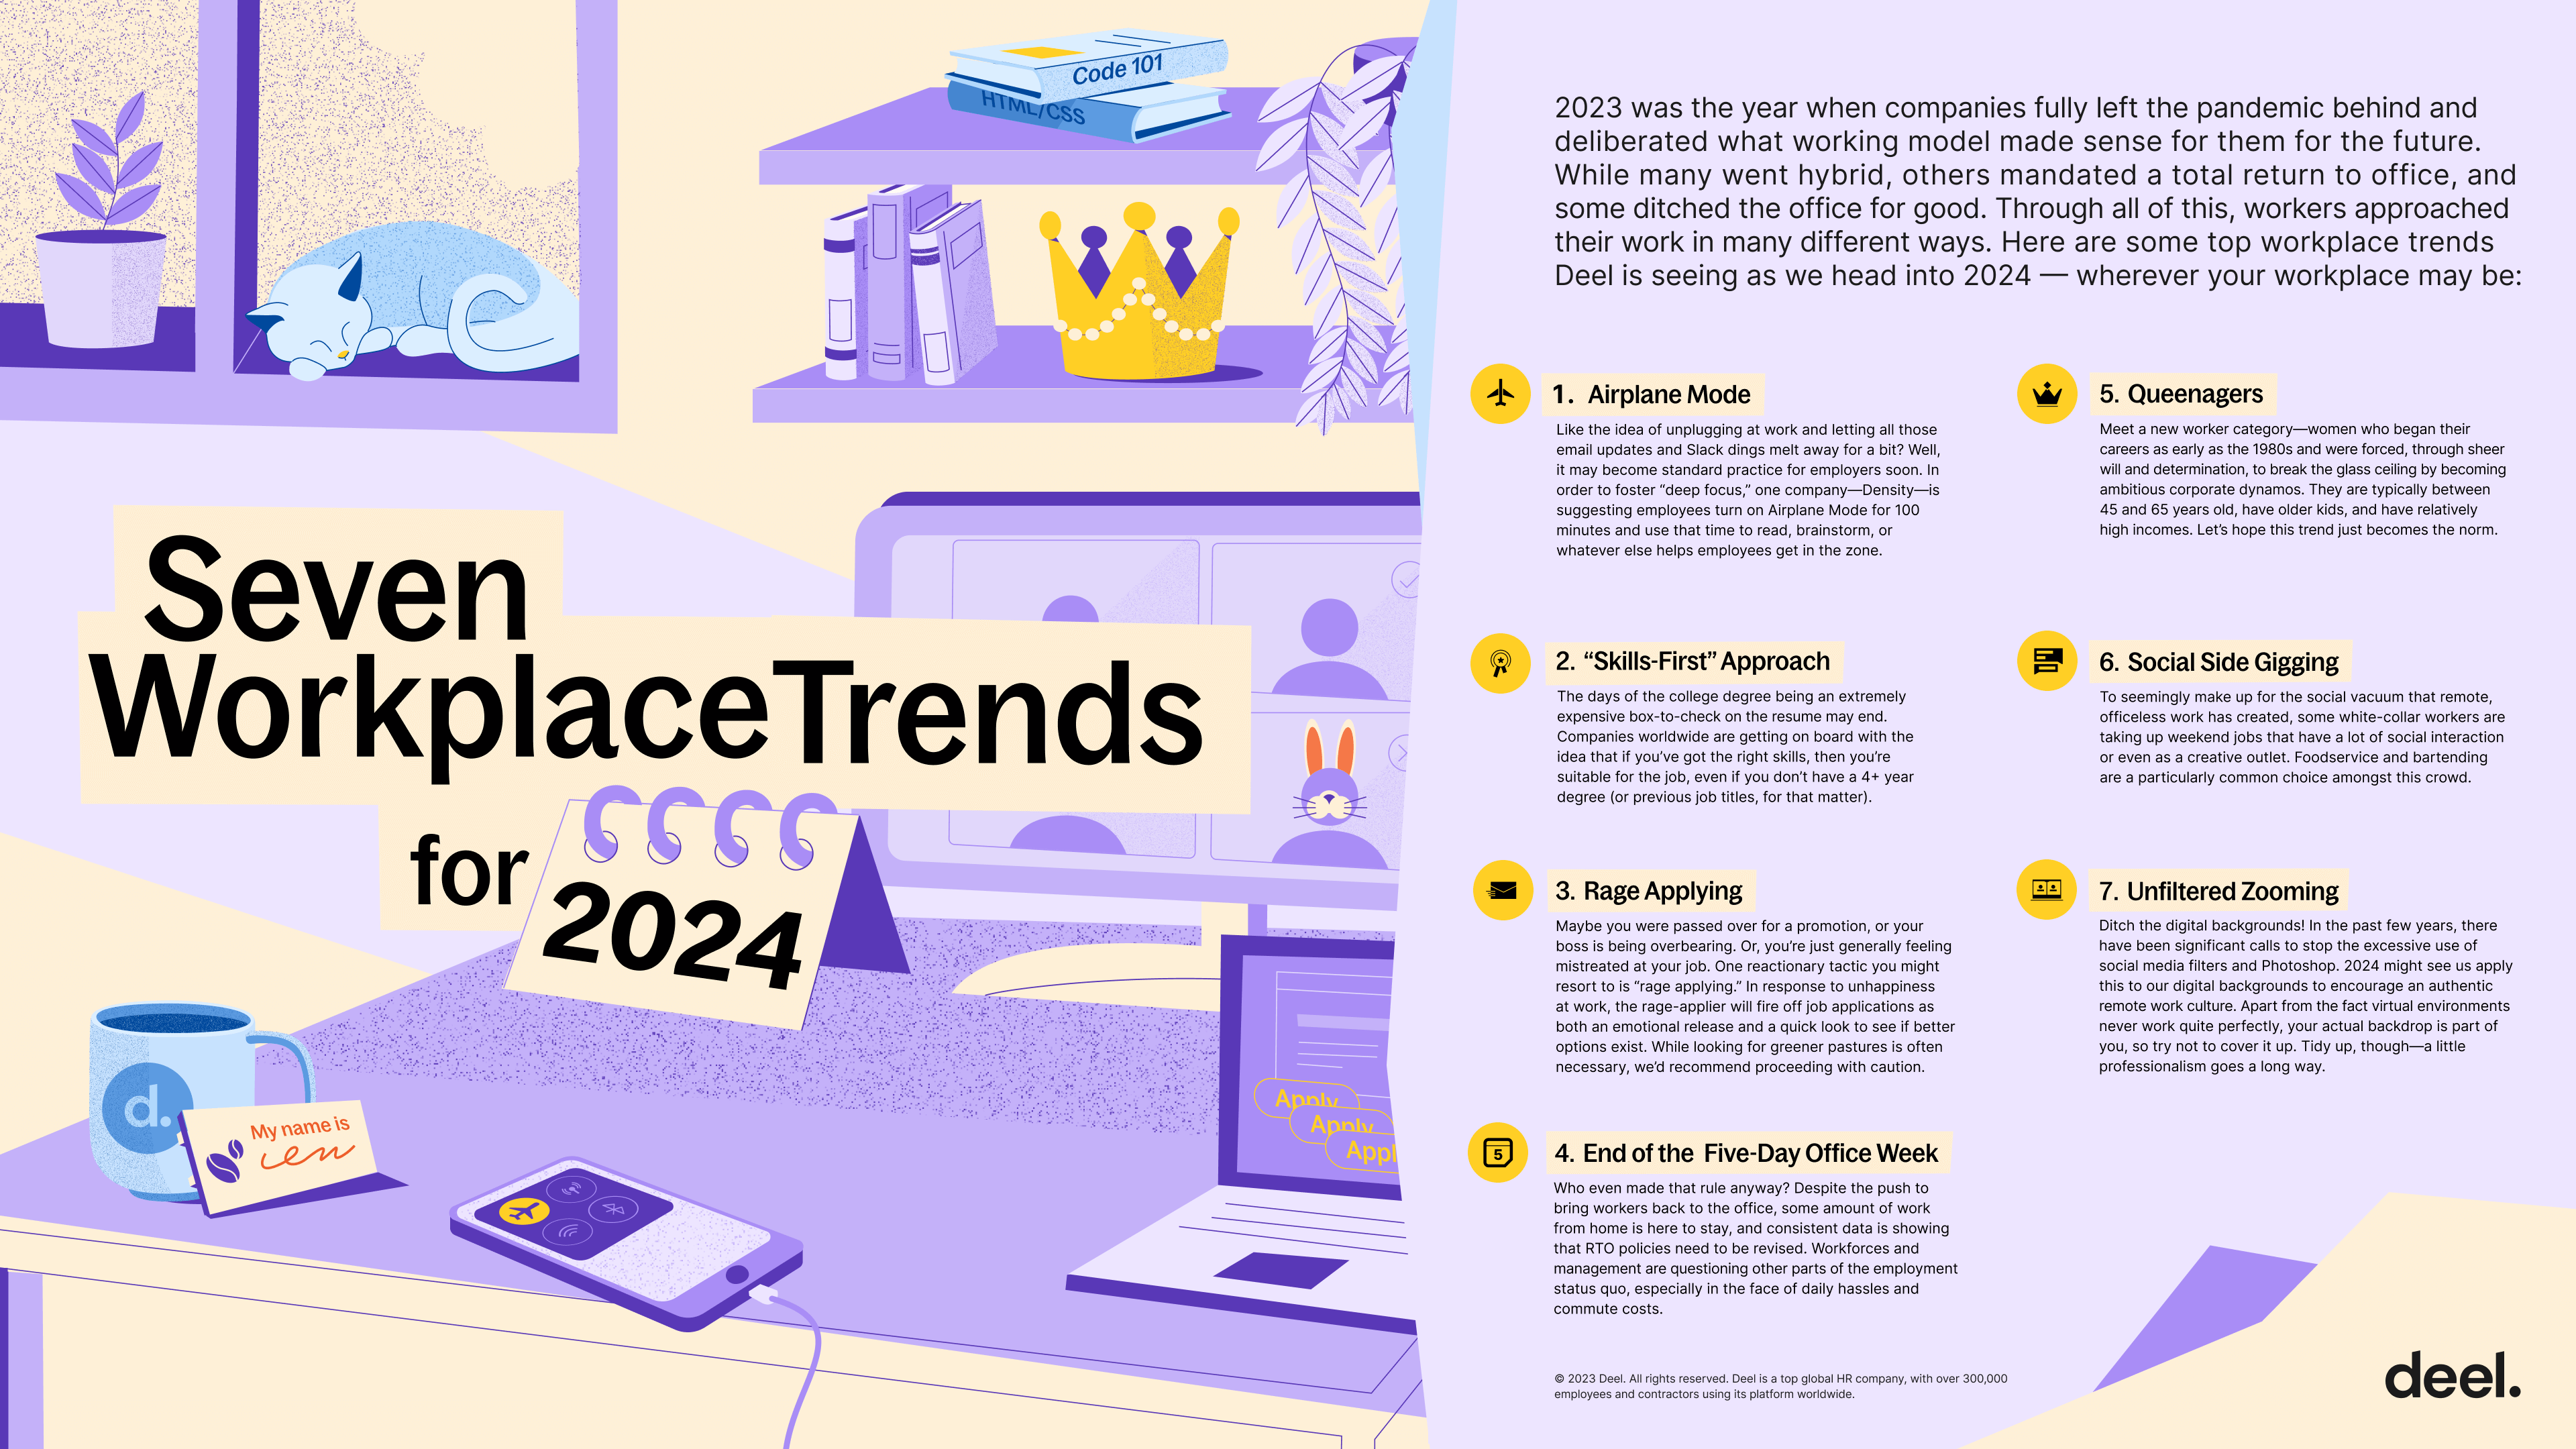 Class of 2024: Job trends that will rule the 2024 placement season